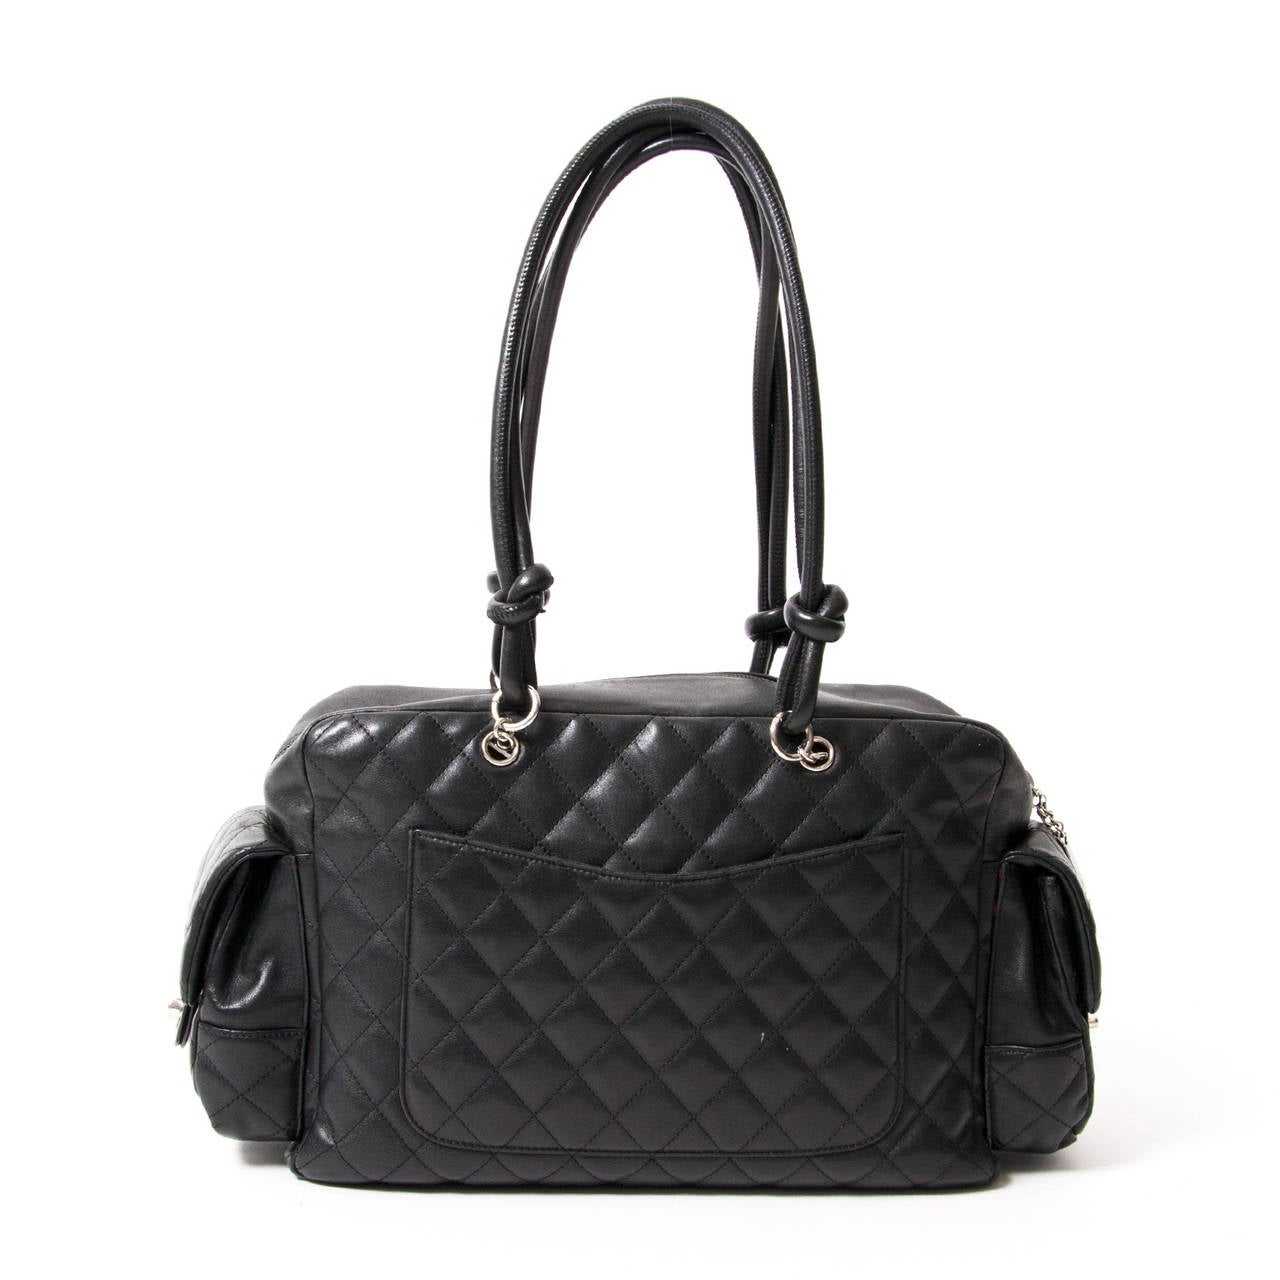 Chanel Black Cambon Reporter Leather Bag 1